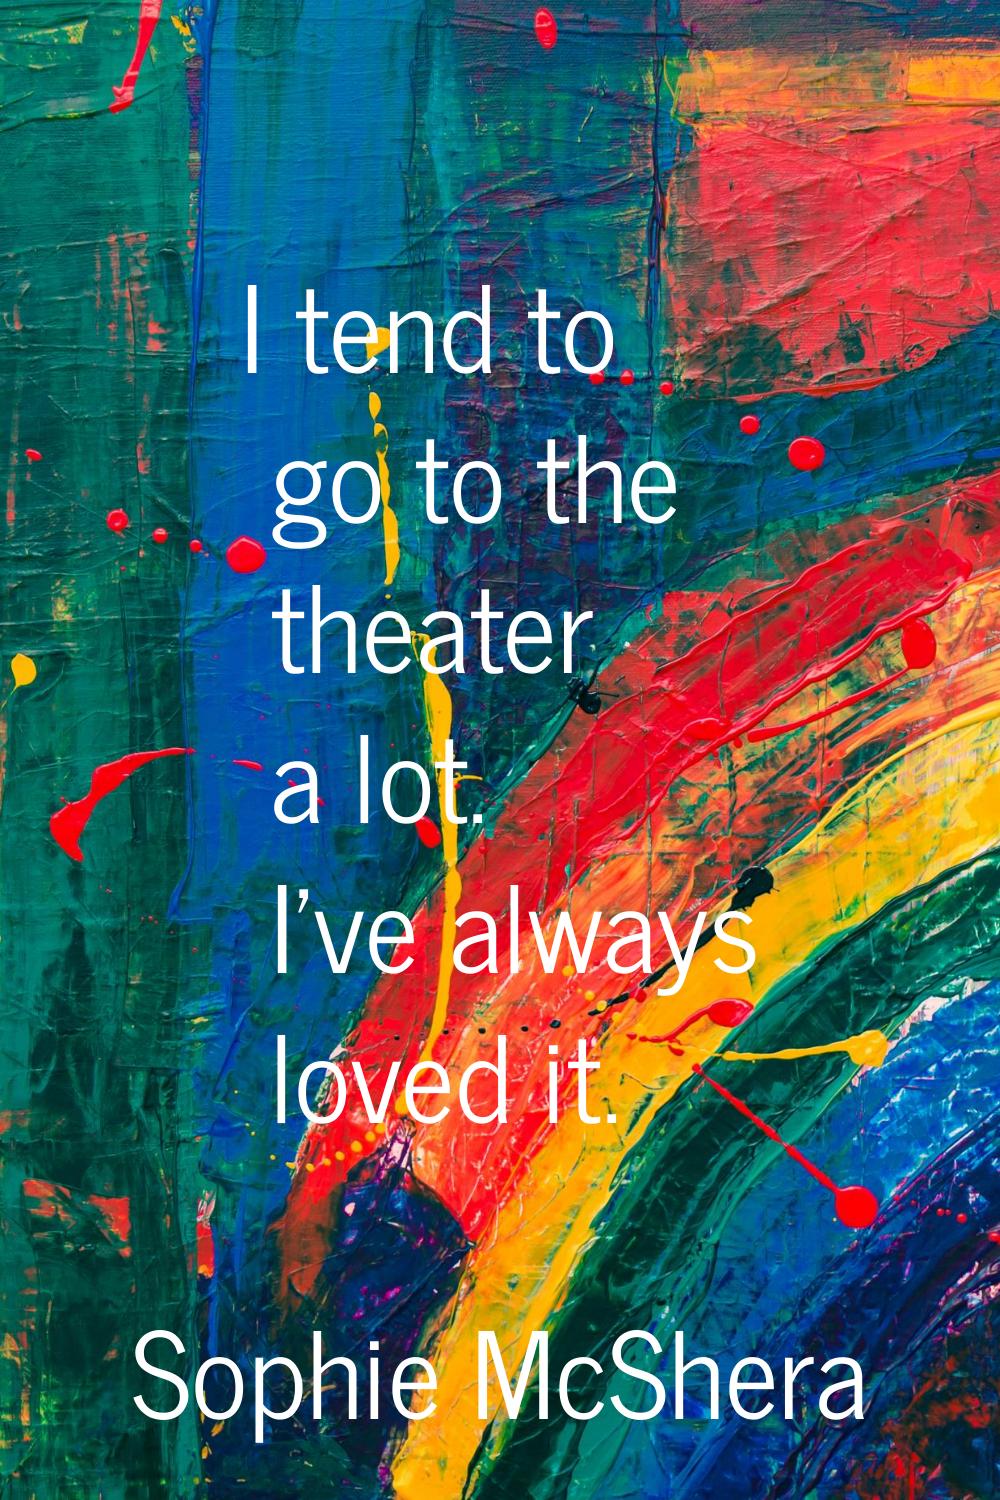 I tend to go to the theater a lot. I've always loved it.